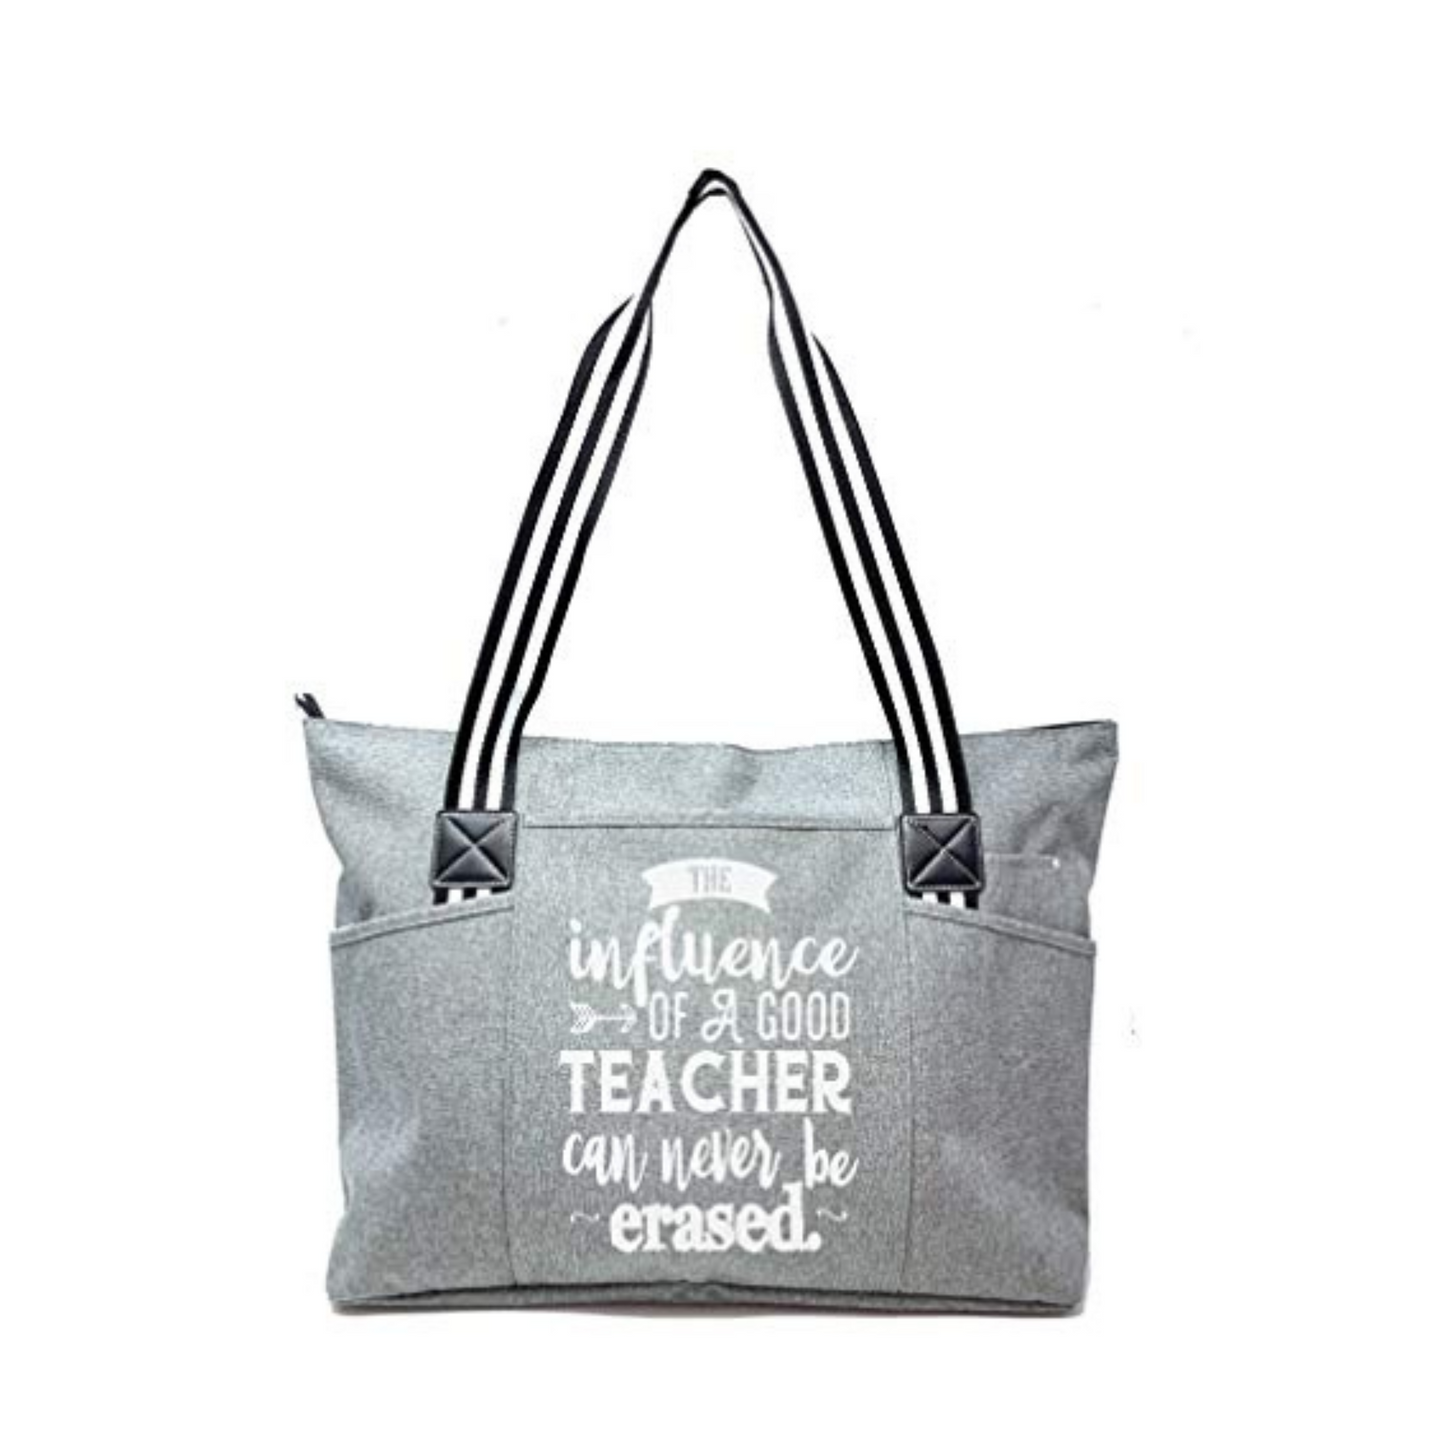 Influence of a Good Teacher can Never be Erased Tessa Gray Tote Bag for Teachers